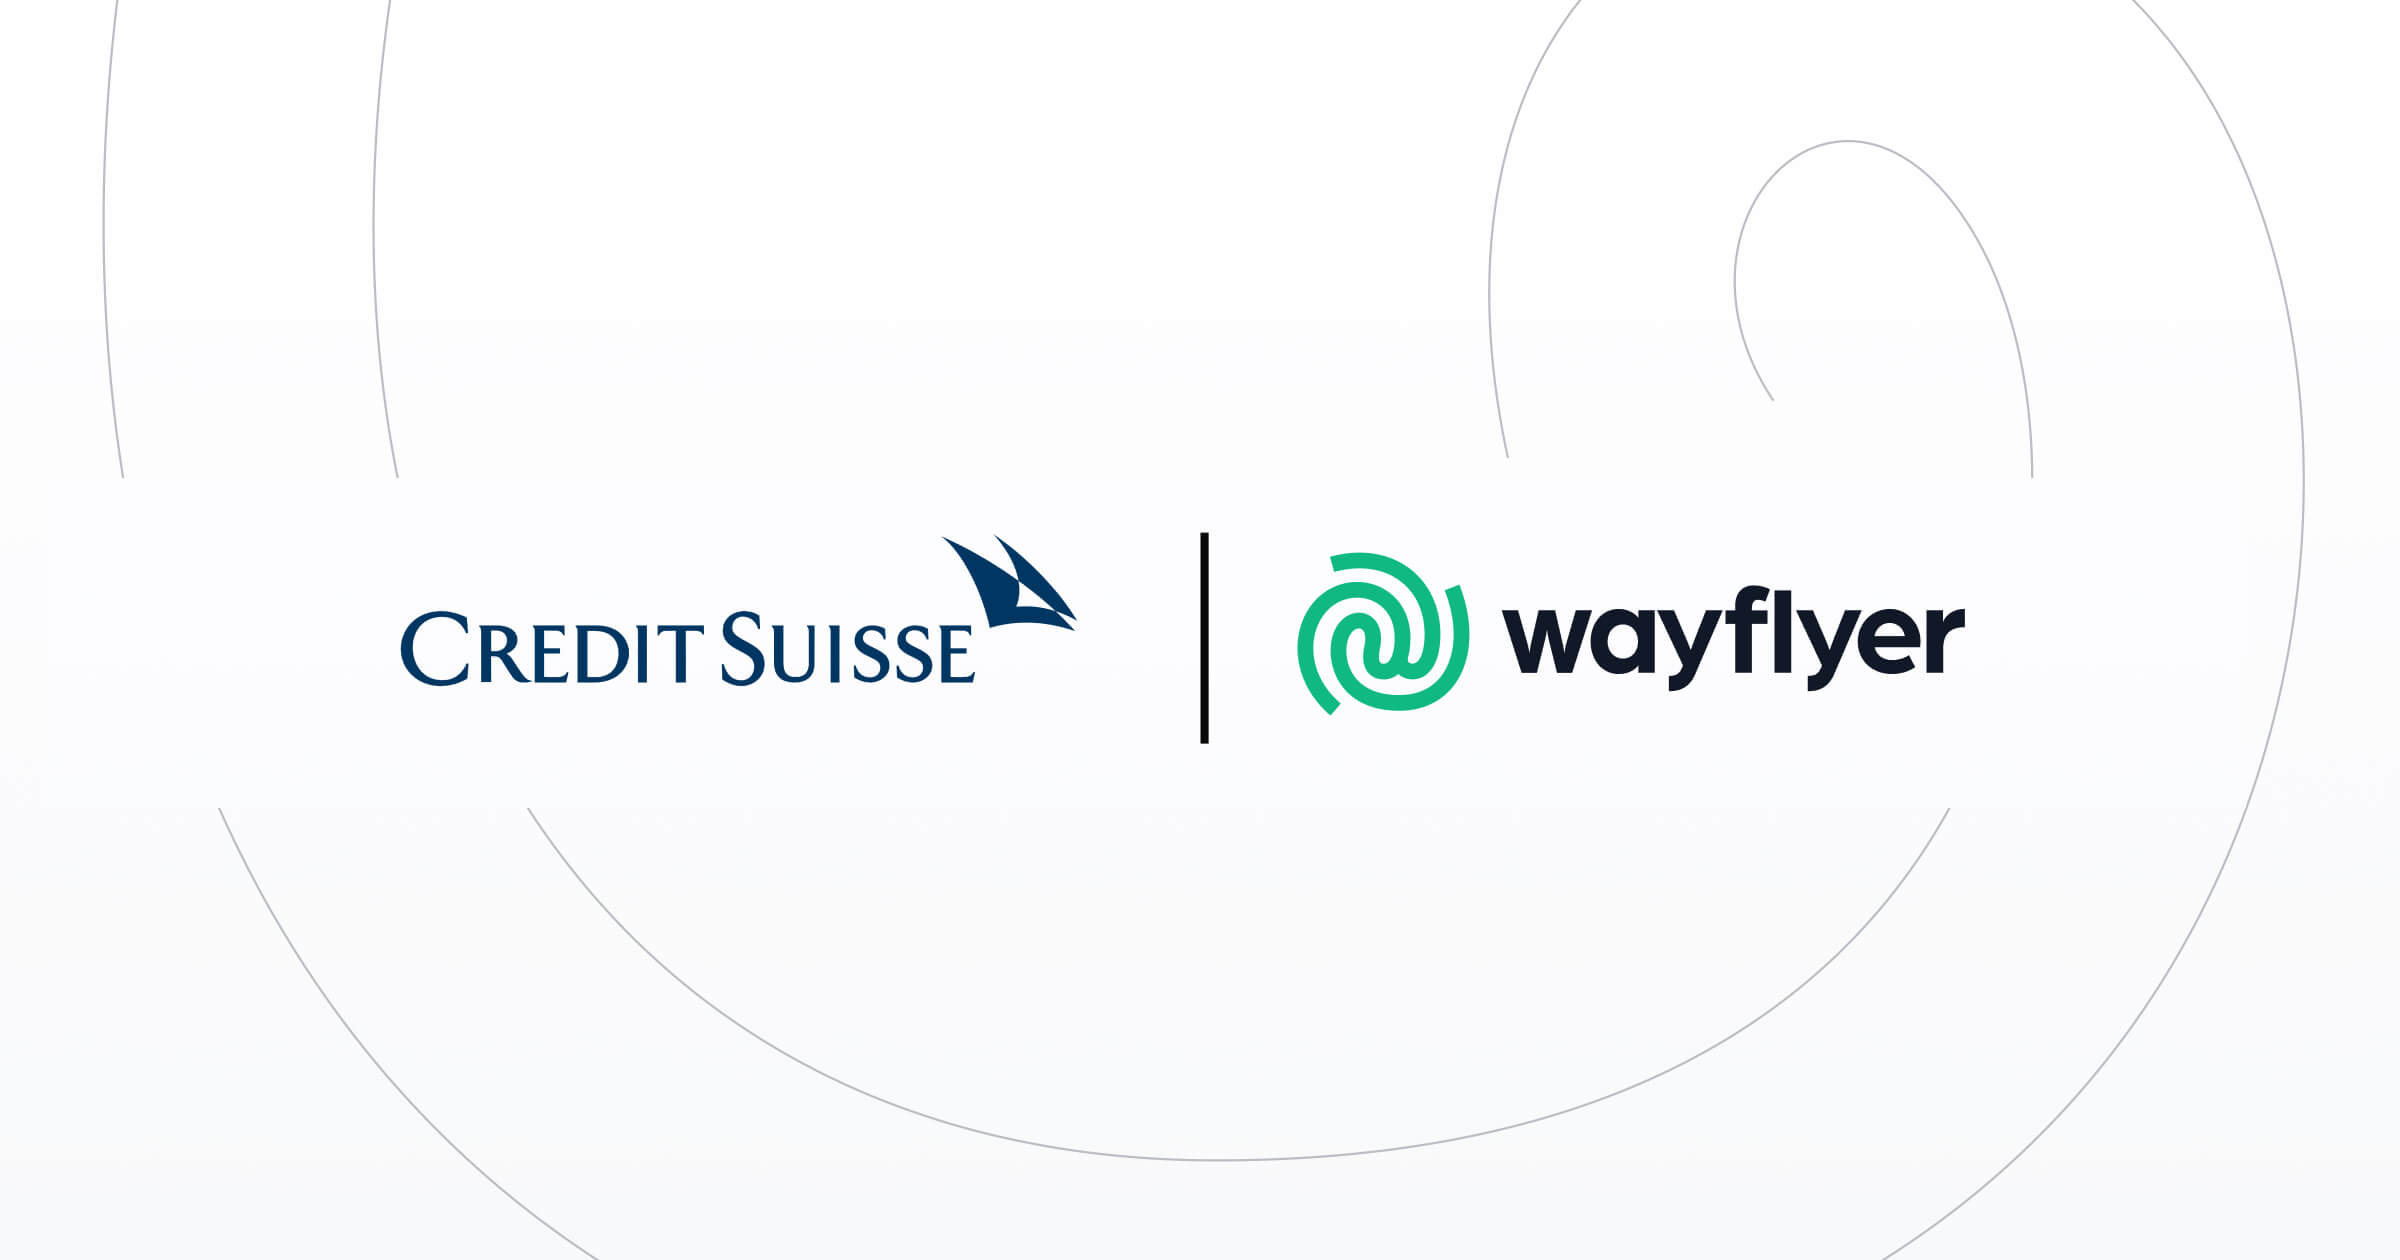 Credit Suisse and Wayflyer logos separated by a bar